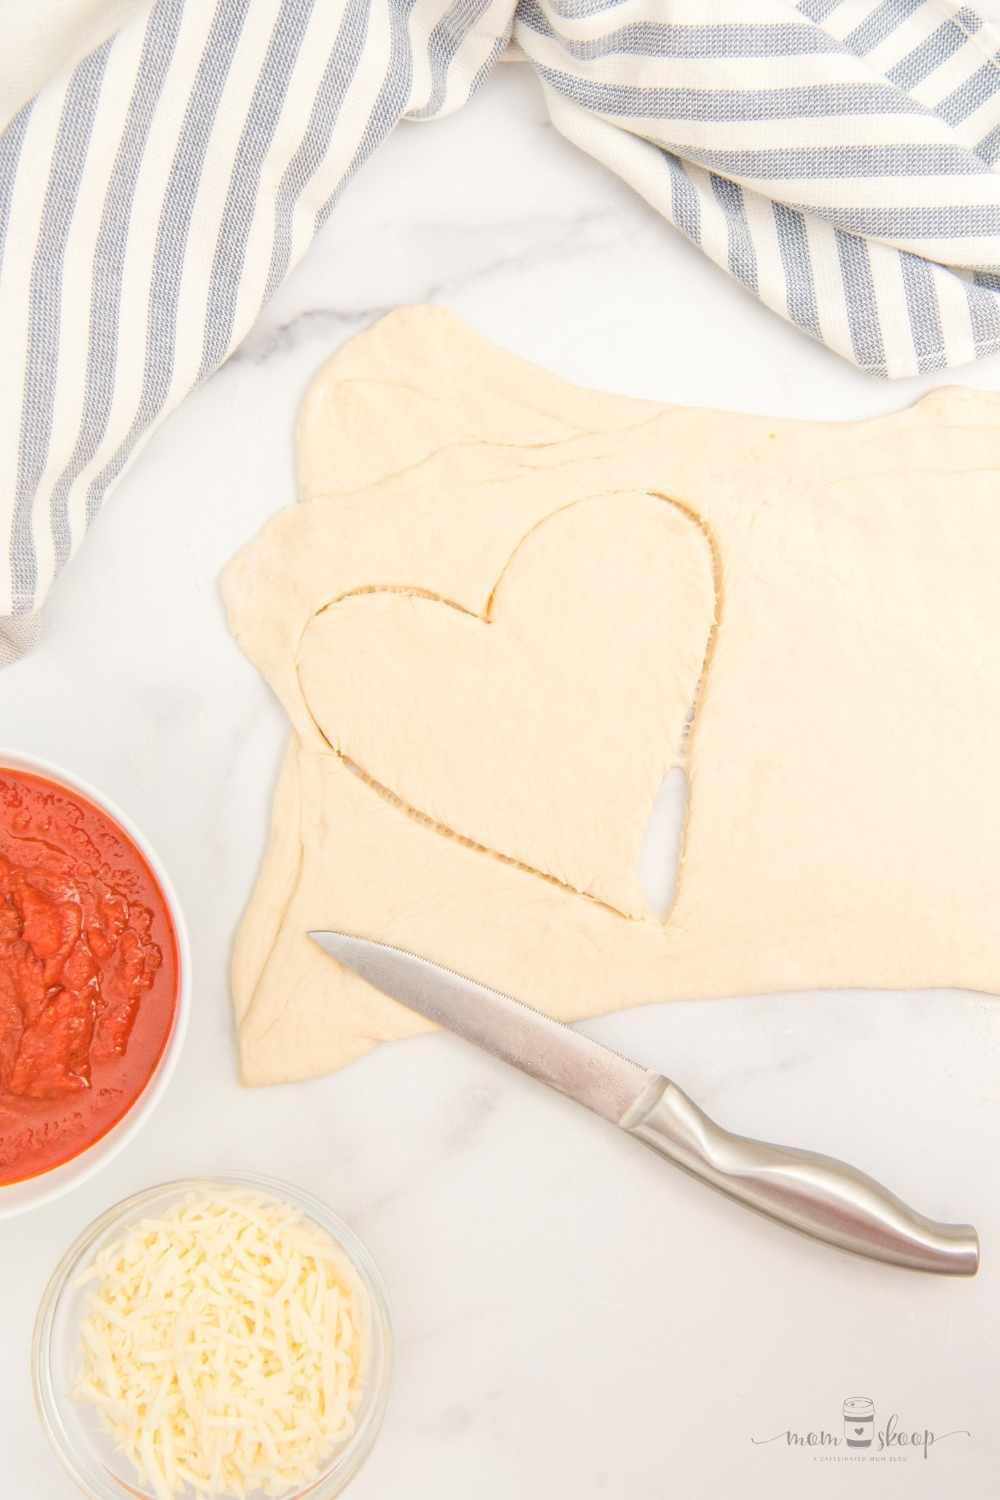 How to cut out a heart in pizza dough